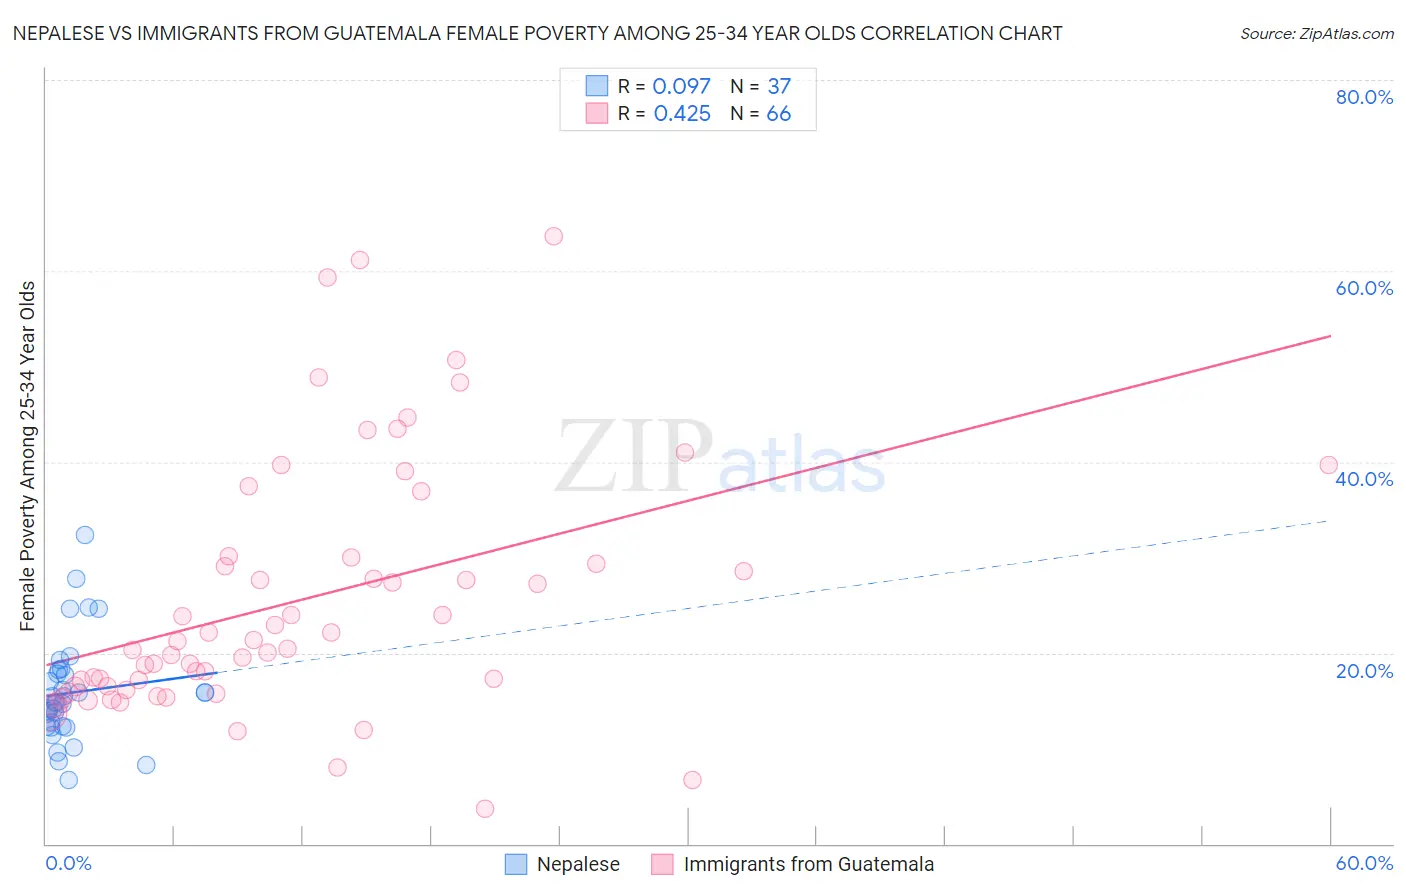 Nepalese vs Immigrants from Guatemala Female Poverty Among 25-34 Year Olds